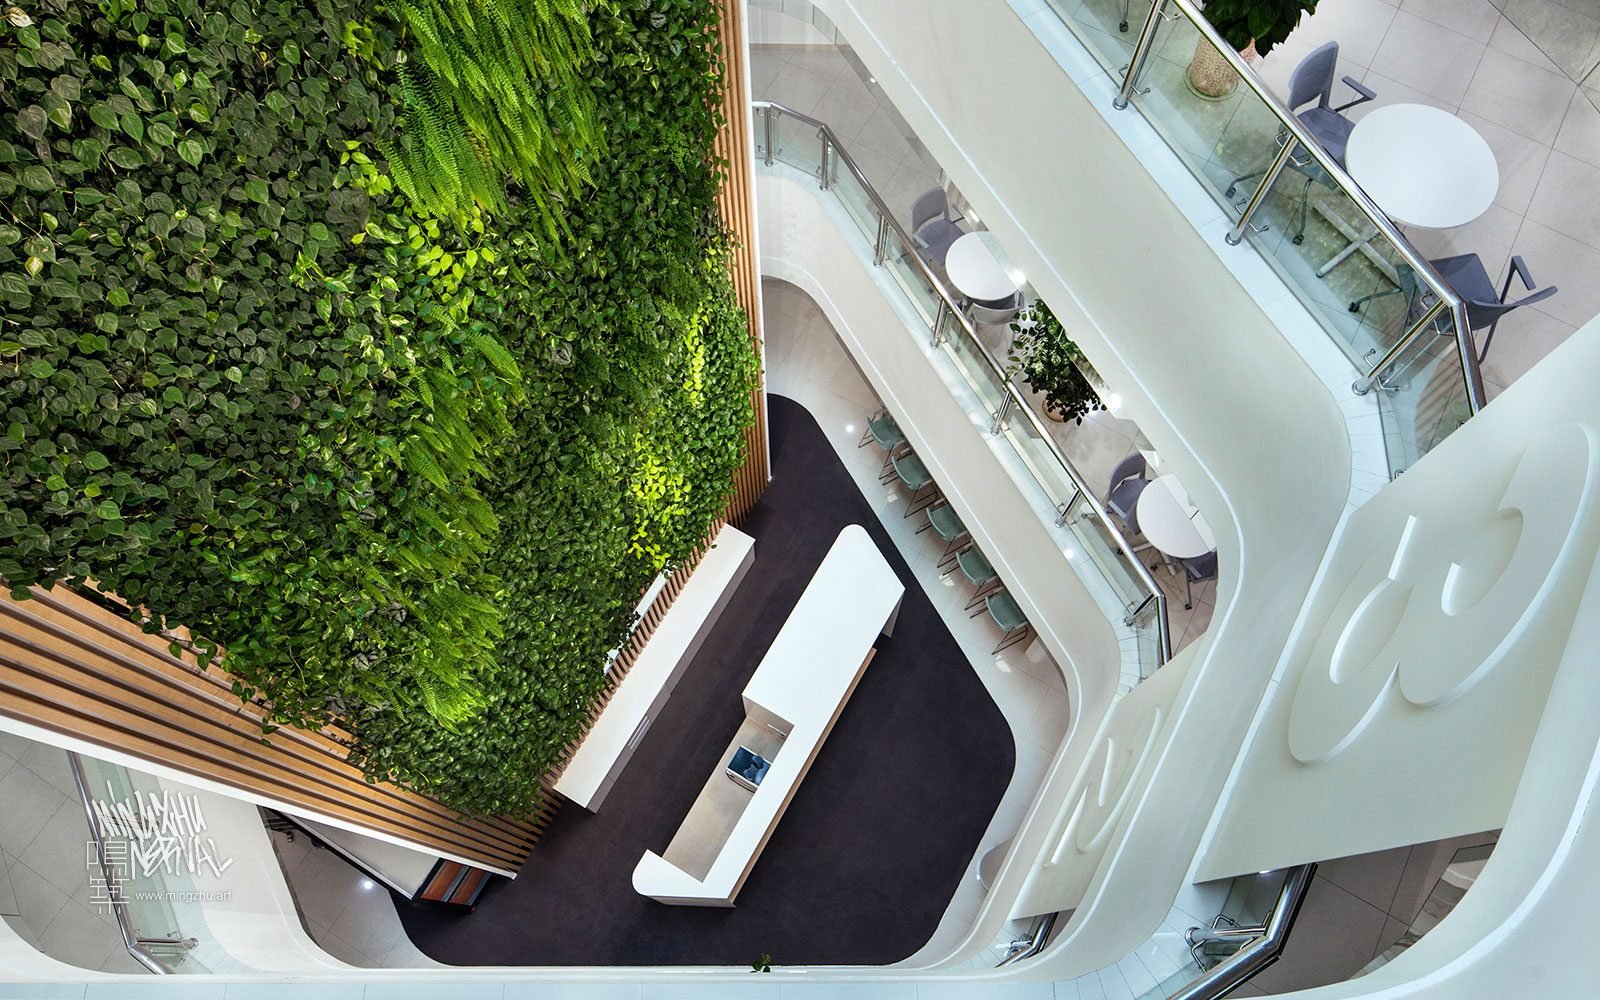 At Mingzhu Nerval, we thrive at creating the most beautiful vertical gardens in the world. For SAP, we created a "waterfall" living wall design - Shanghai, 2012.